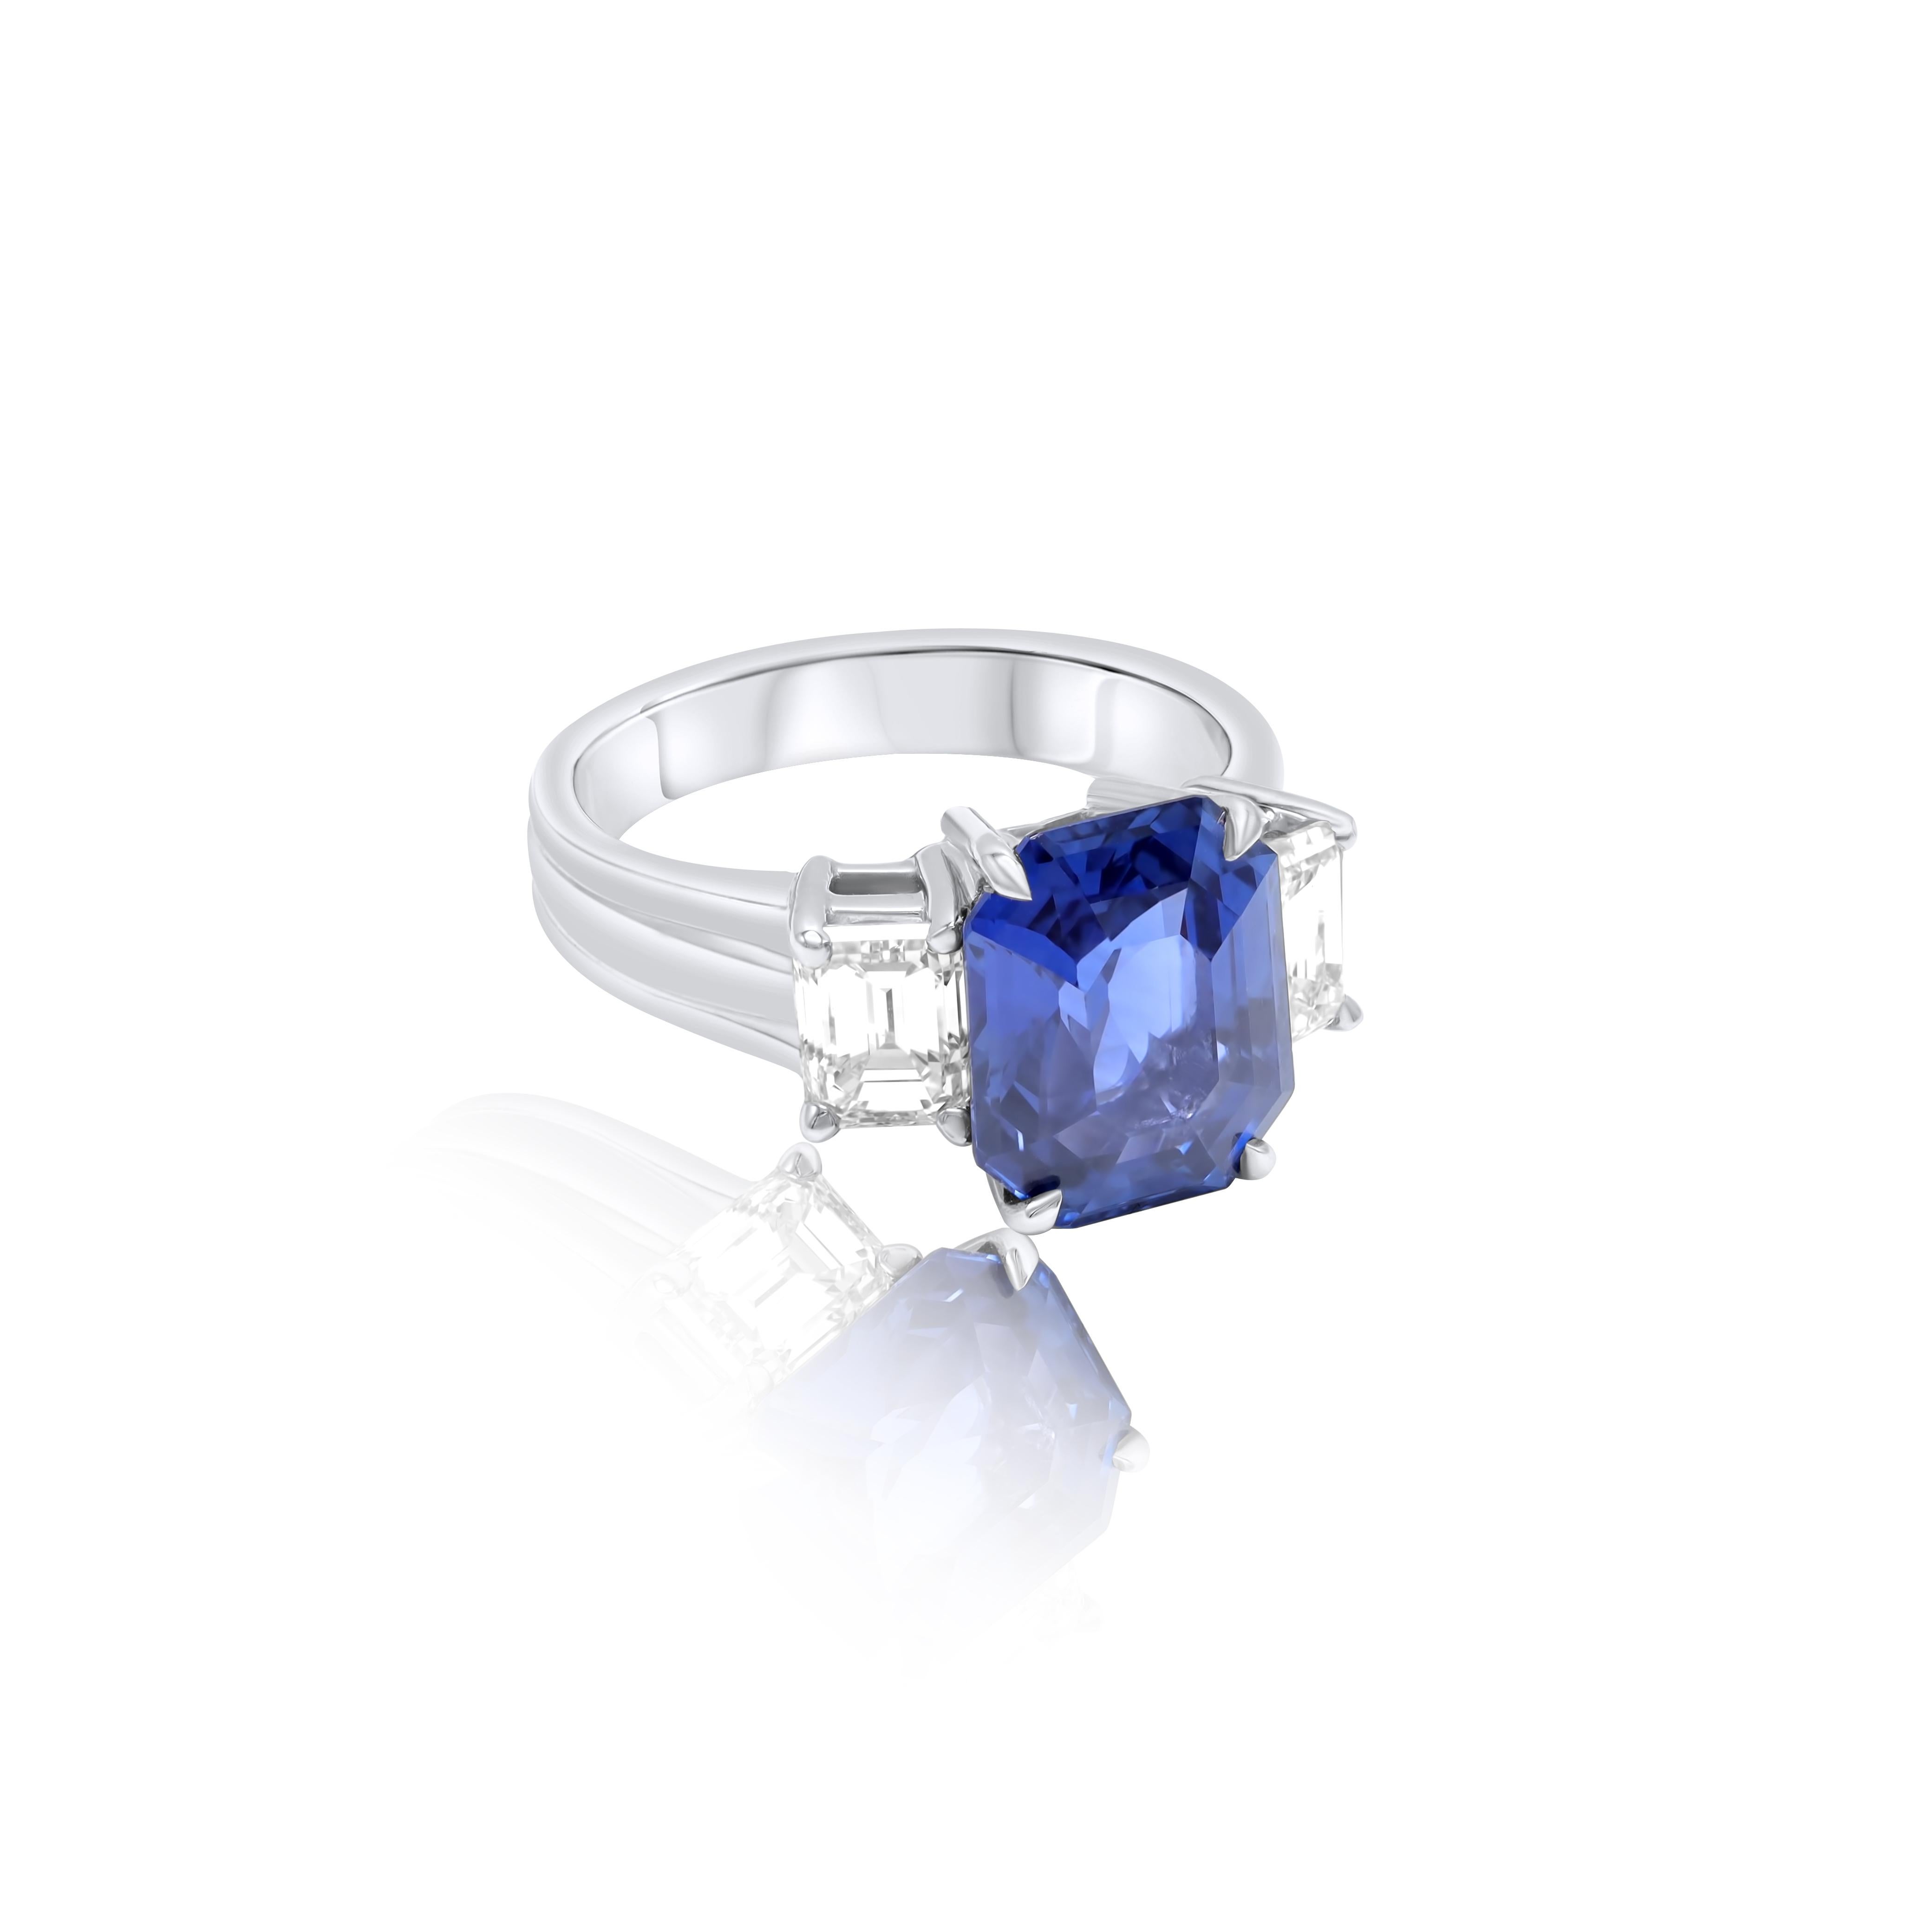 Platinum sapphire and diamond ring featuring a 6.04 ct natural emerald cut Ceylon sapphire with 2 emerald cut diamonds on each side totaling 1.50 cts of diamonds 